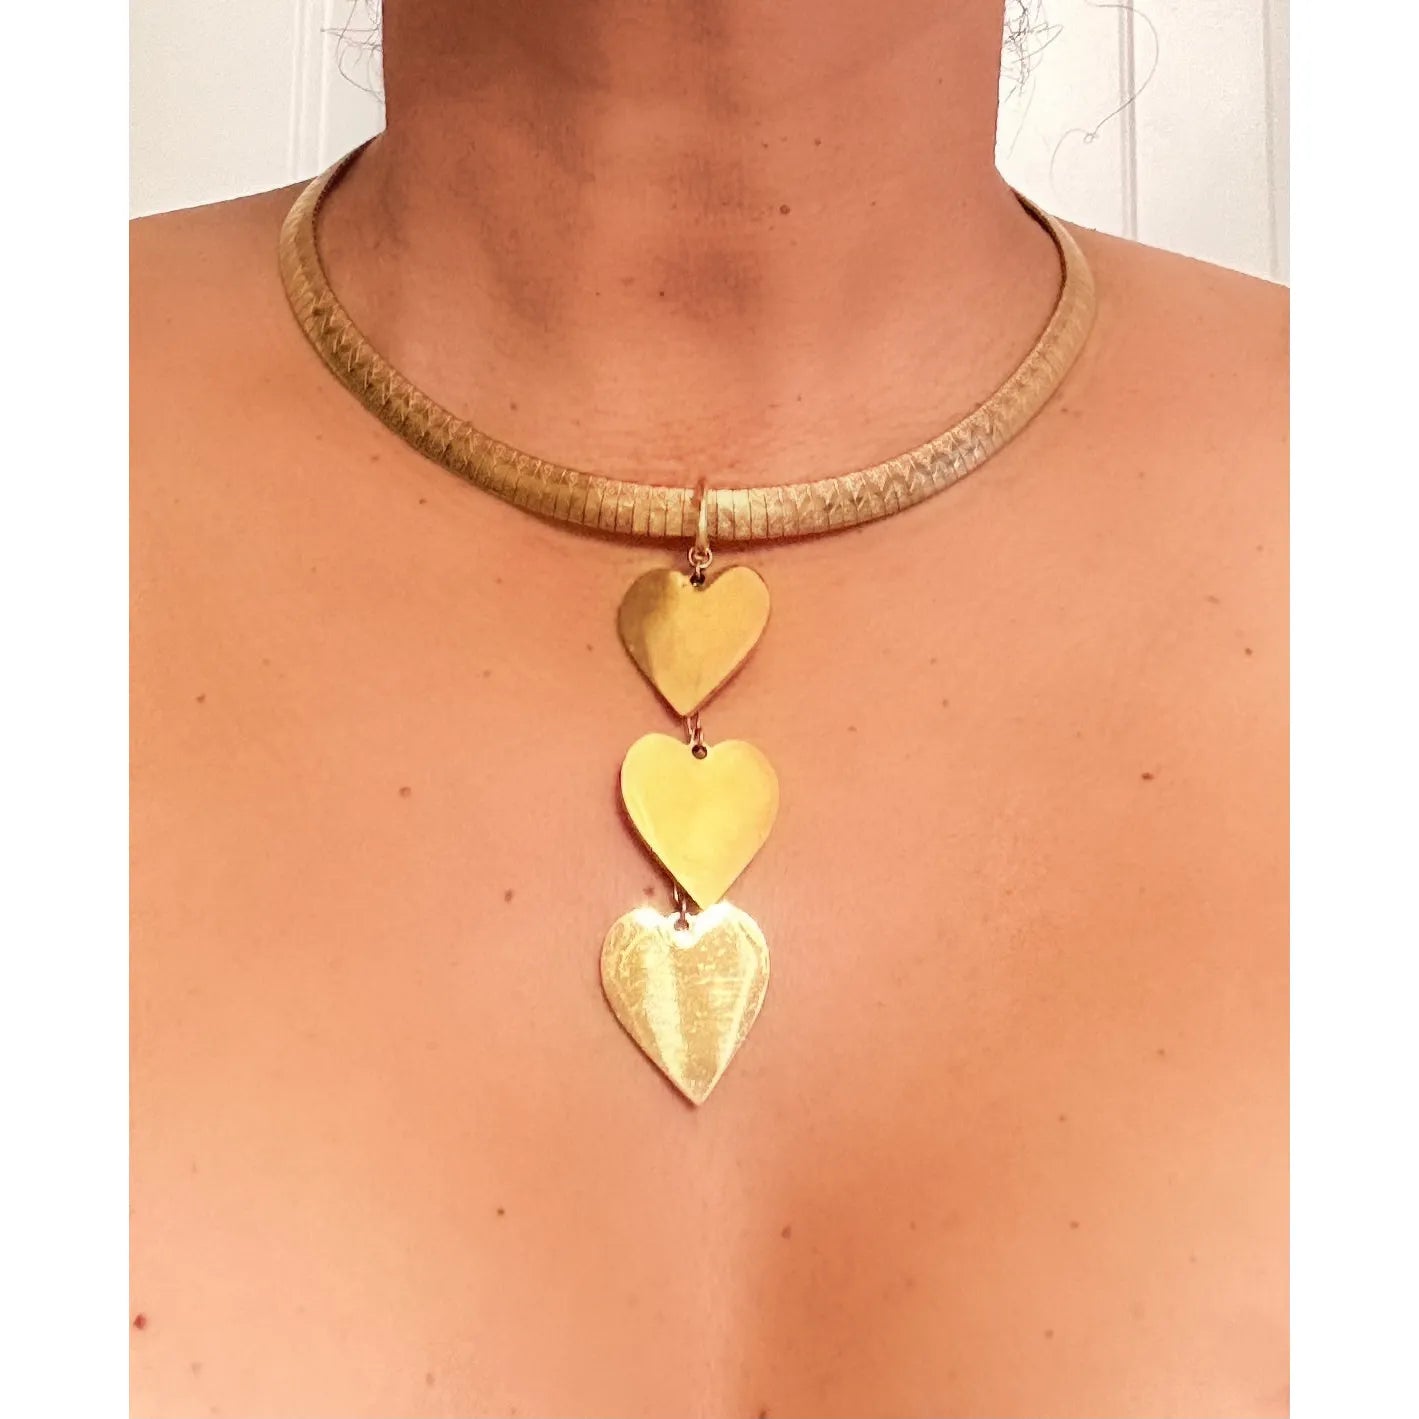 BACK IT UP NECKLACE